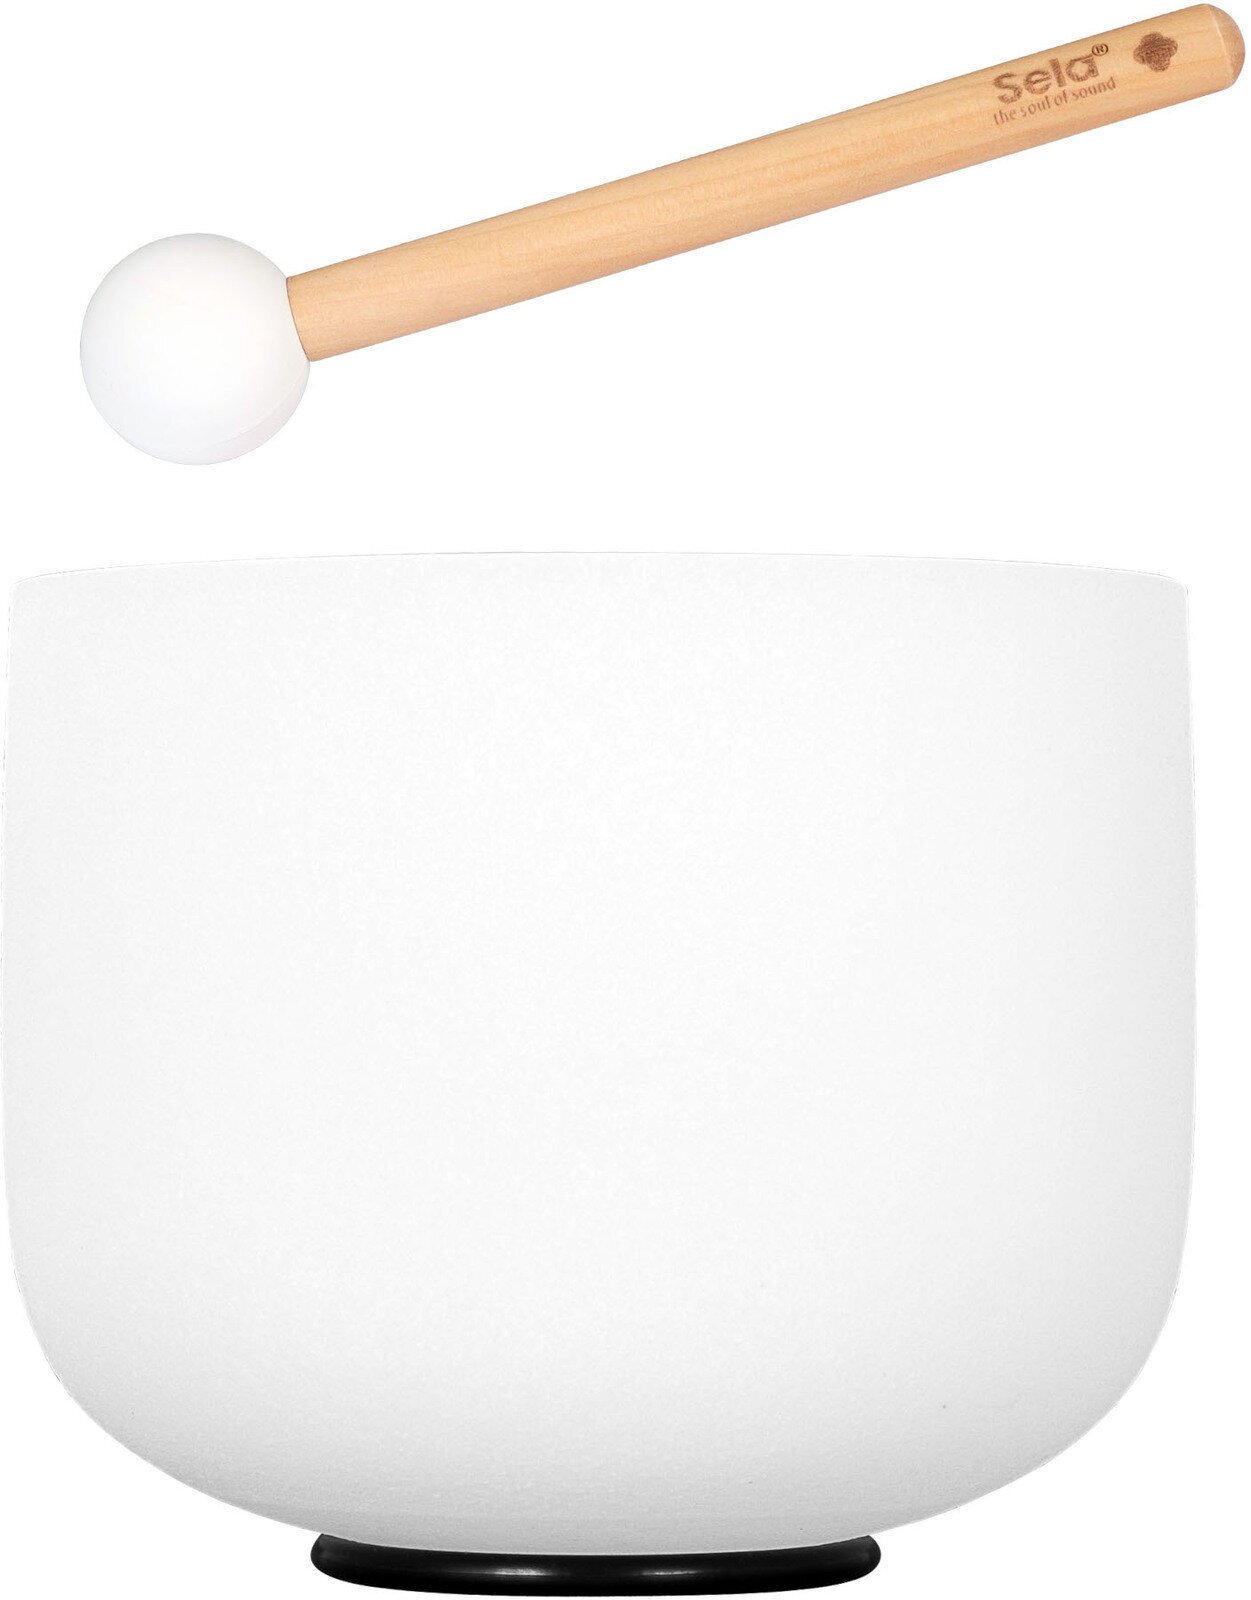 Percussion for music therapy Sela 10" Crystal Singing Bowl Frosted 432 Hz E incl. 1 Wood Mallet